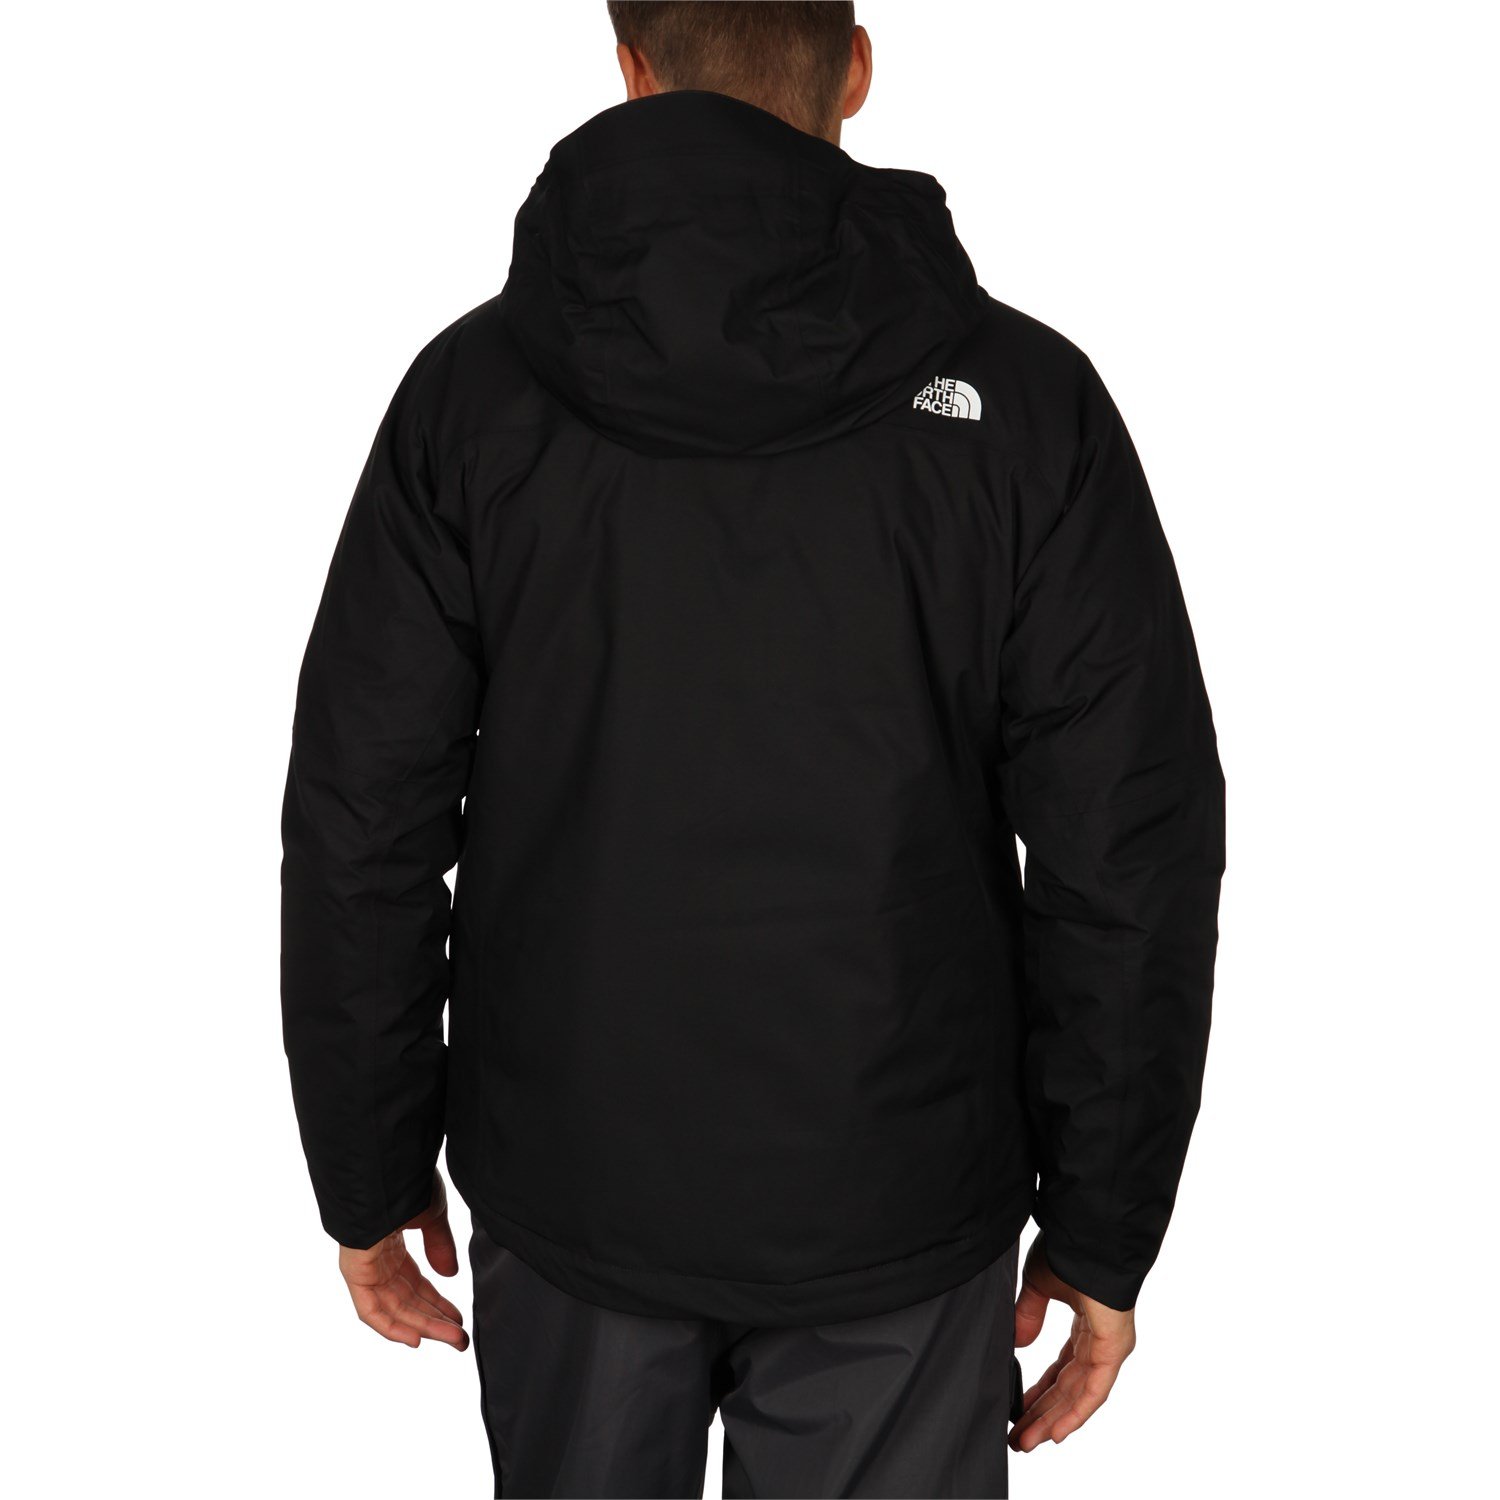 washed north face jacket now flat